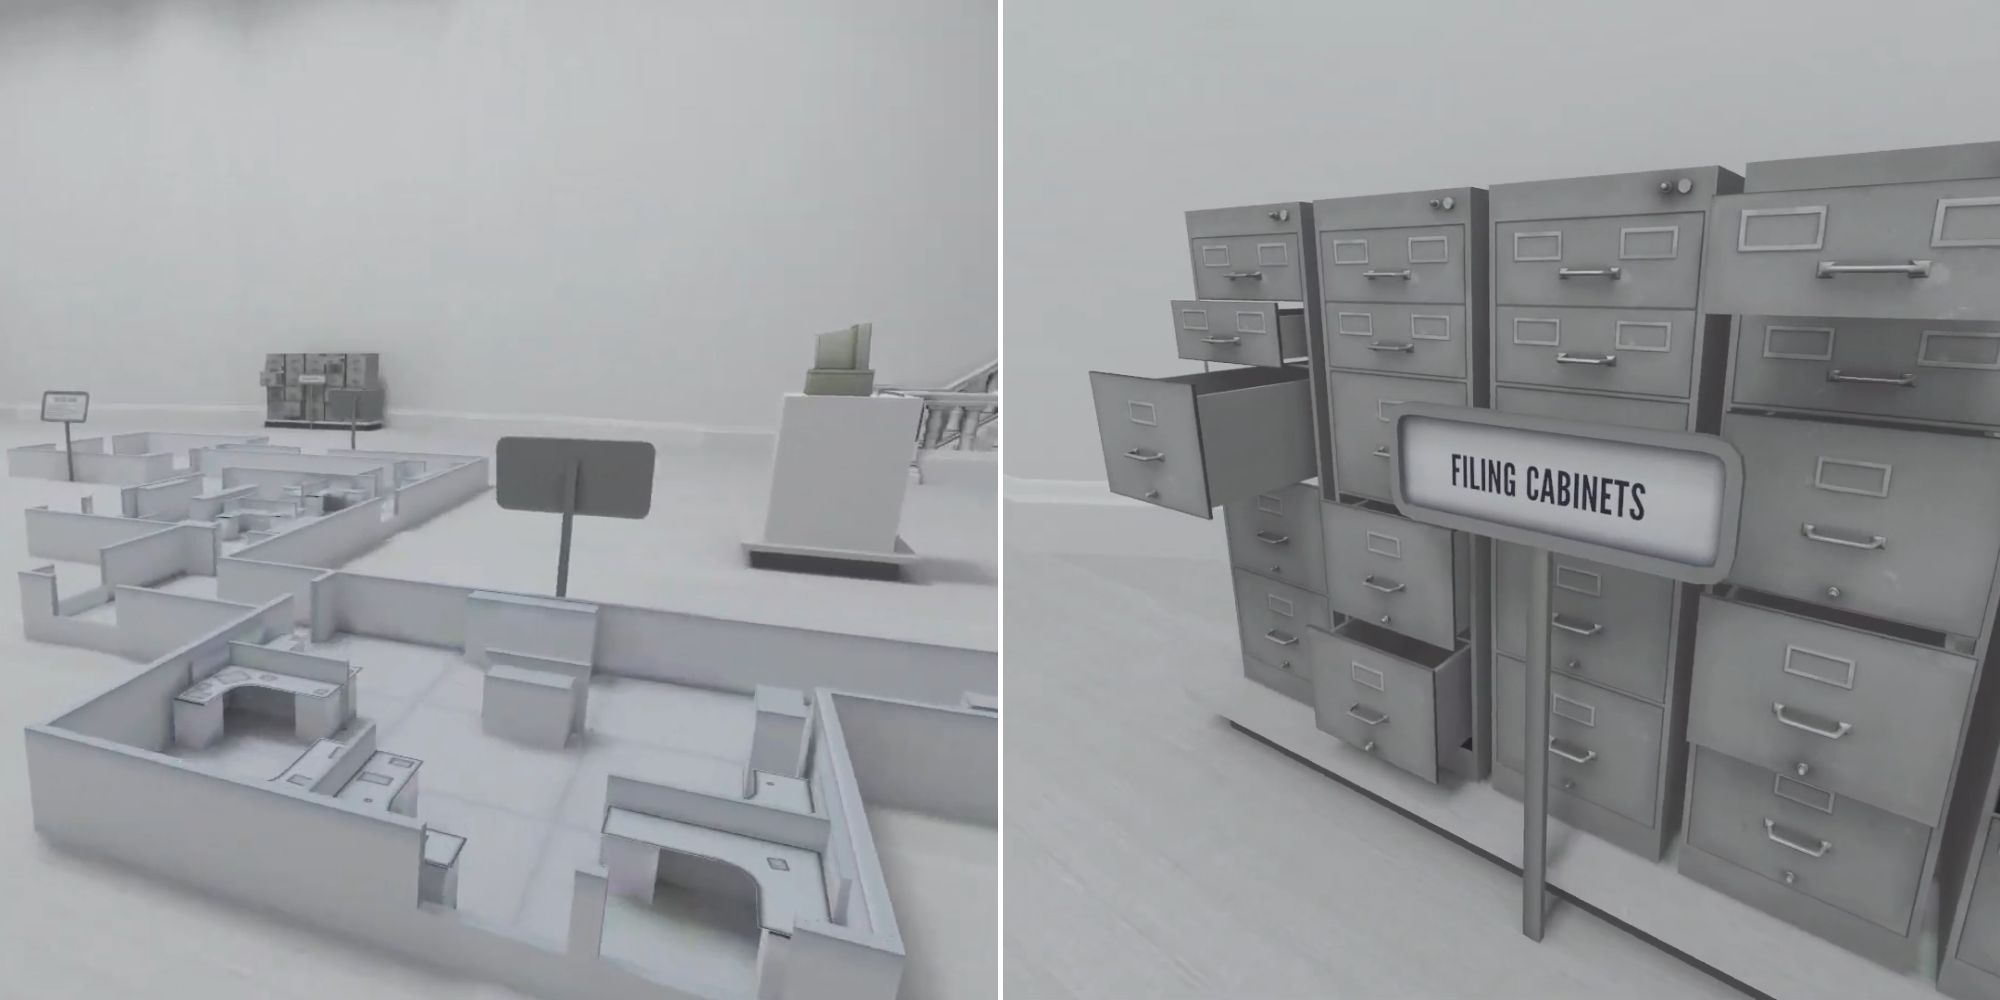 Layout Of The Office and Filing Cabinets Display in the Endgame Museum in The Stanley Parable